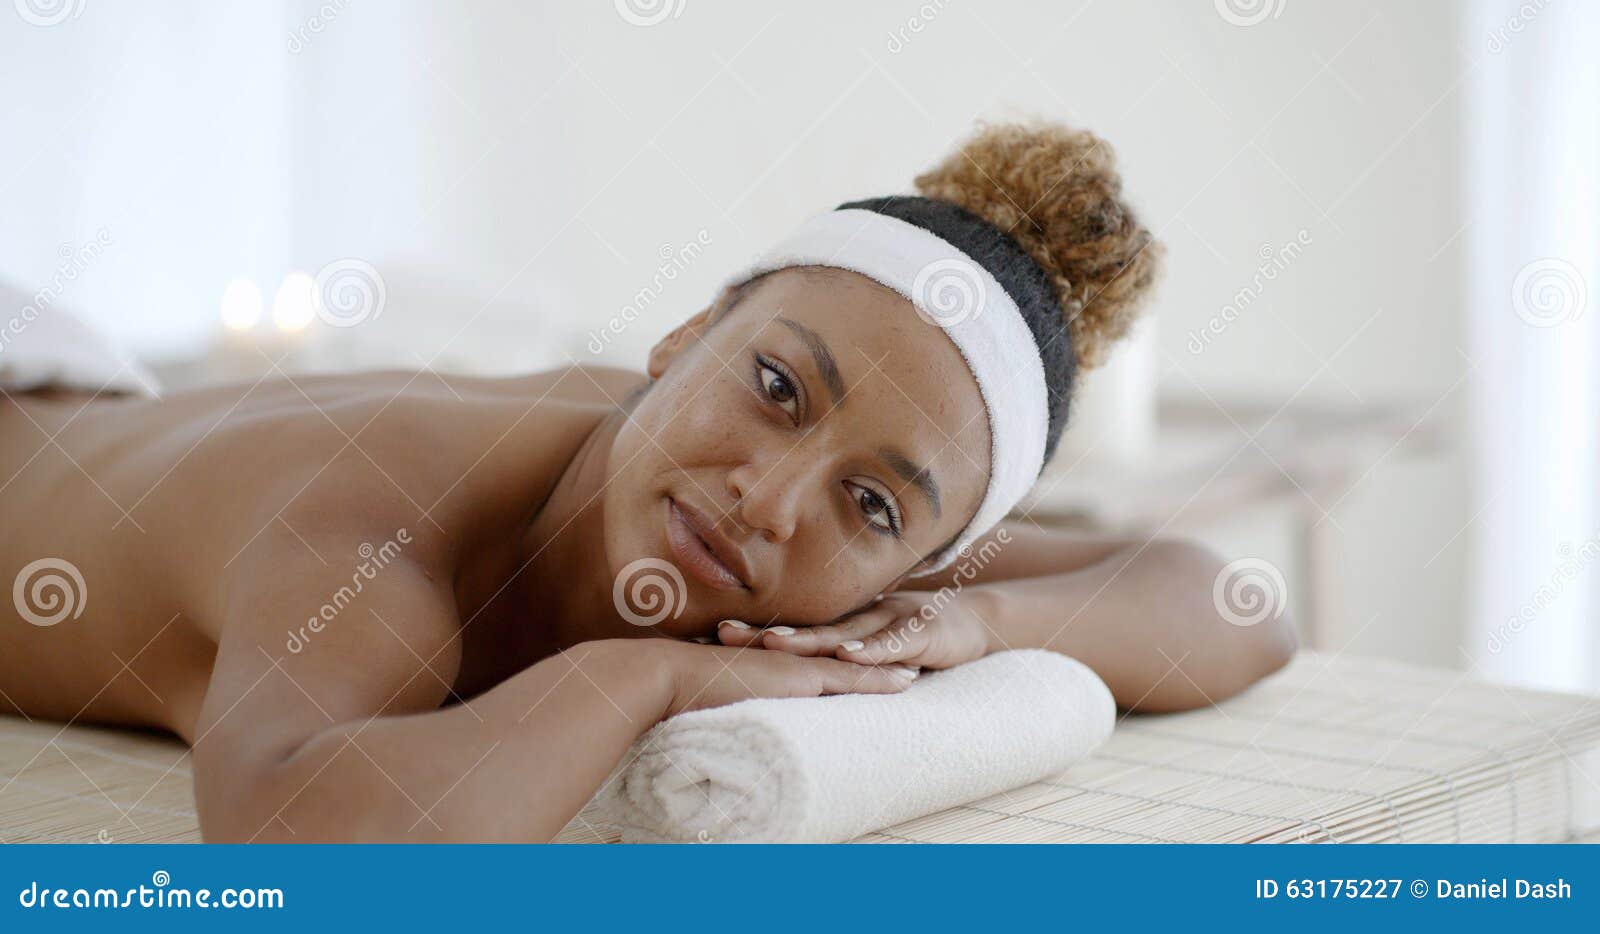 Woman On Massage Table Stock Image Image Of Wellbeing 63175227